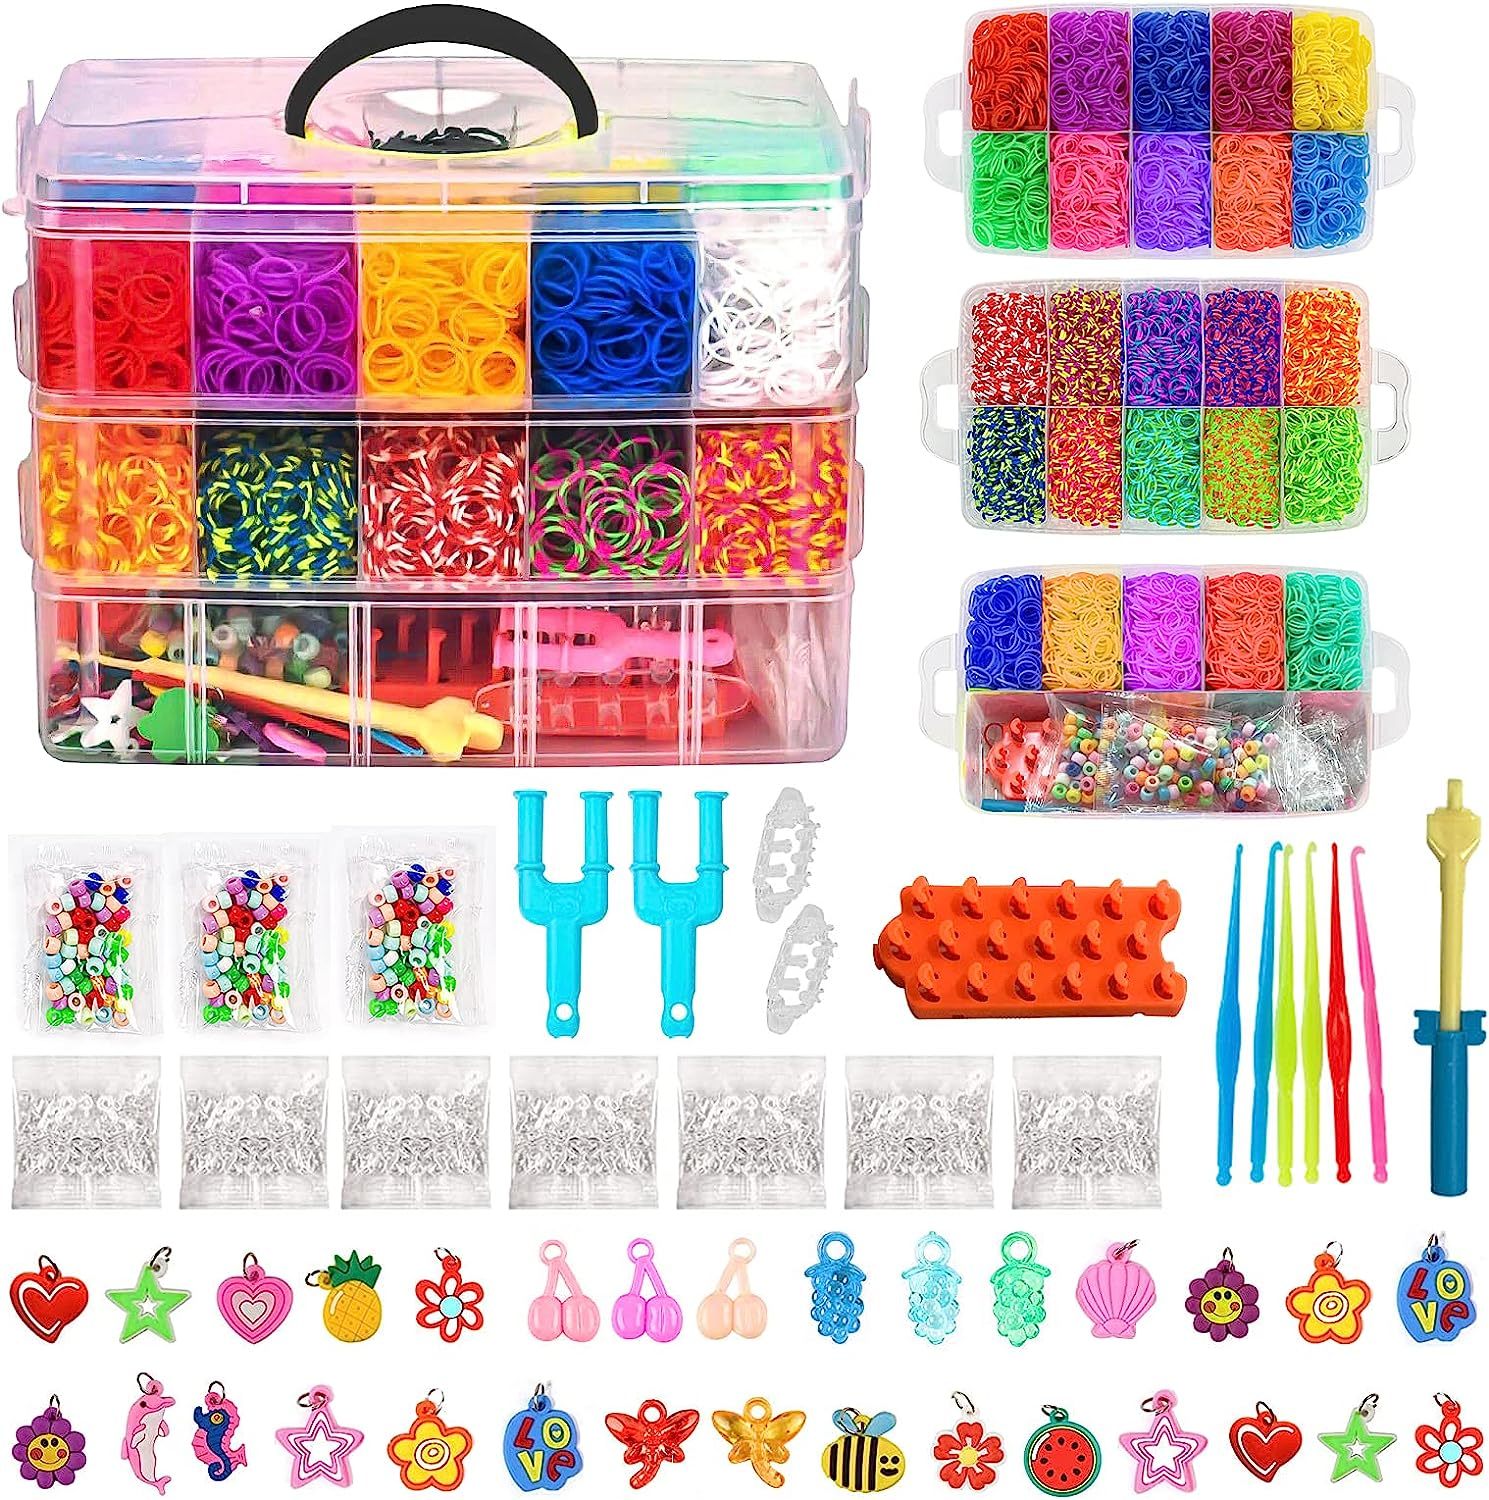 3500+ Rubber Loom Bands Colorful Loom Beads Storage Box Set with